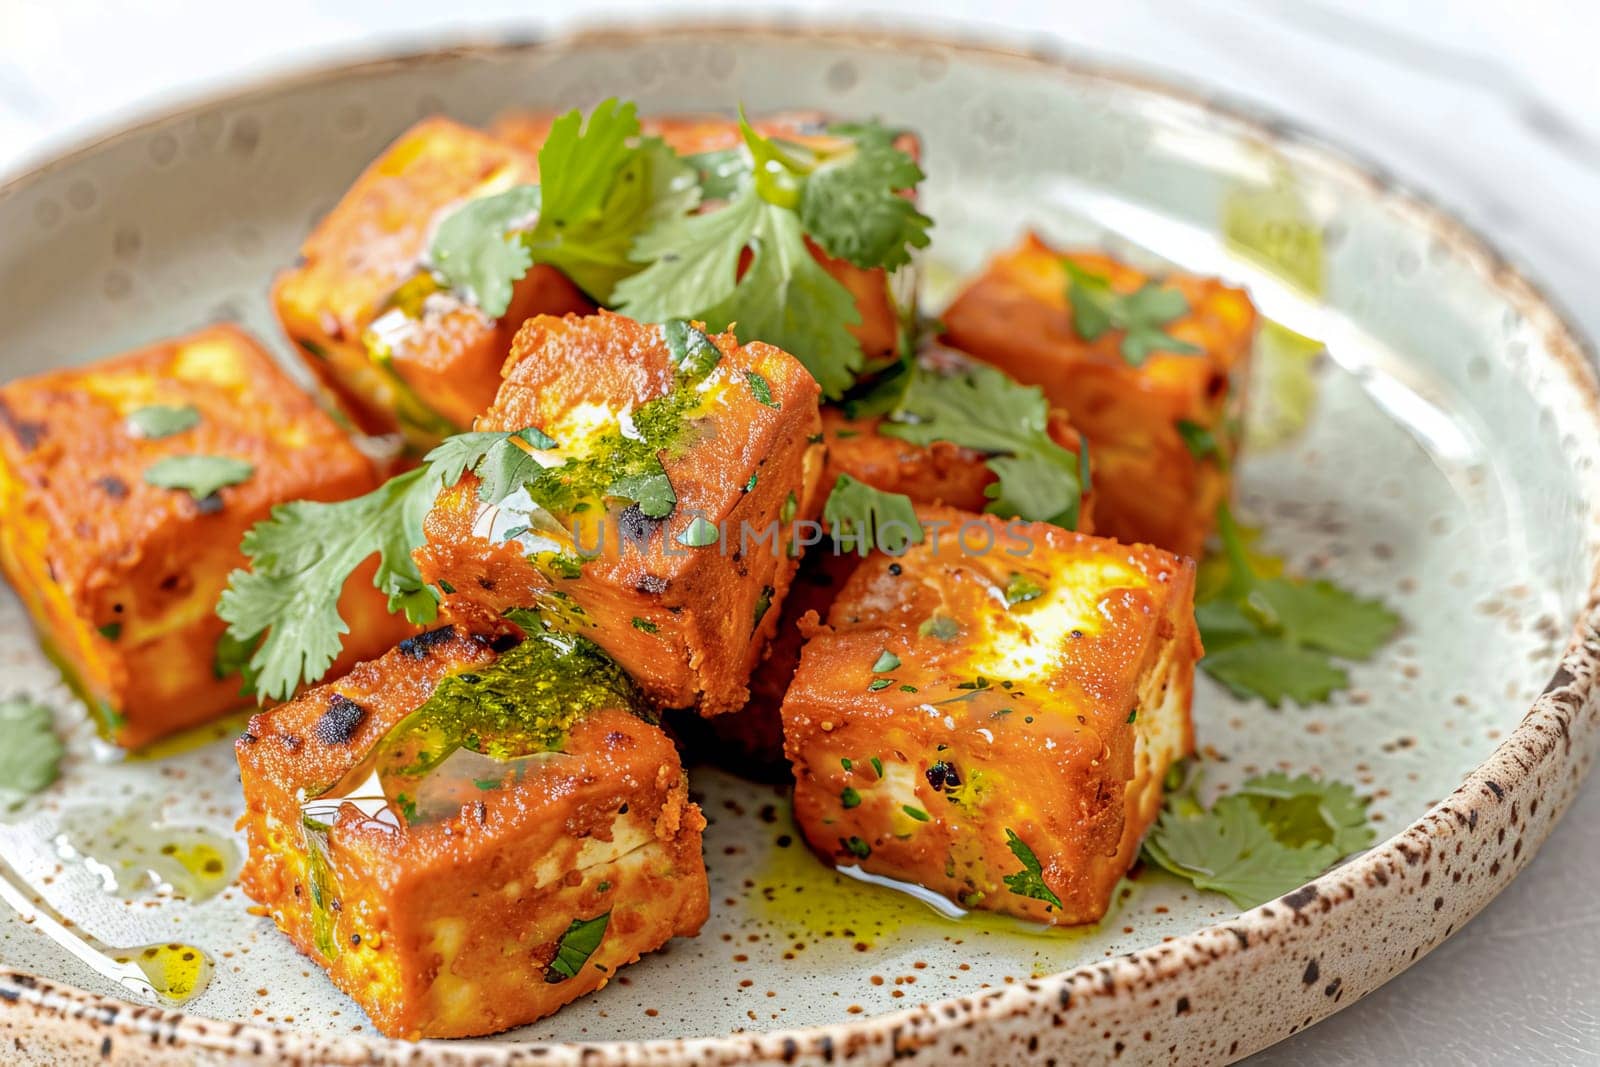 A dish of traditional Indian paneer cheese, diced and fried with spices, garnished with fresh cilantro and pesto on a ceramic plate. AI